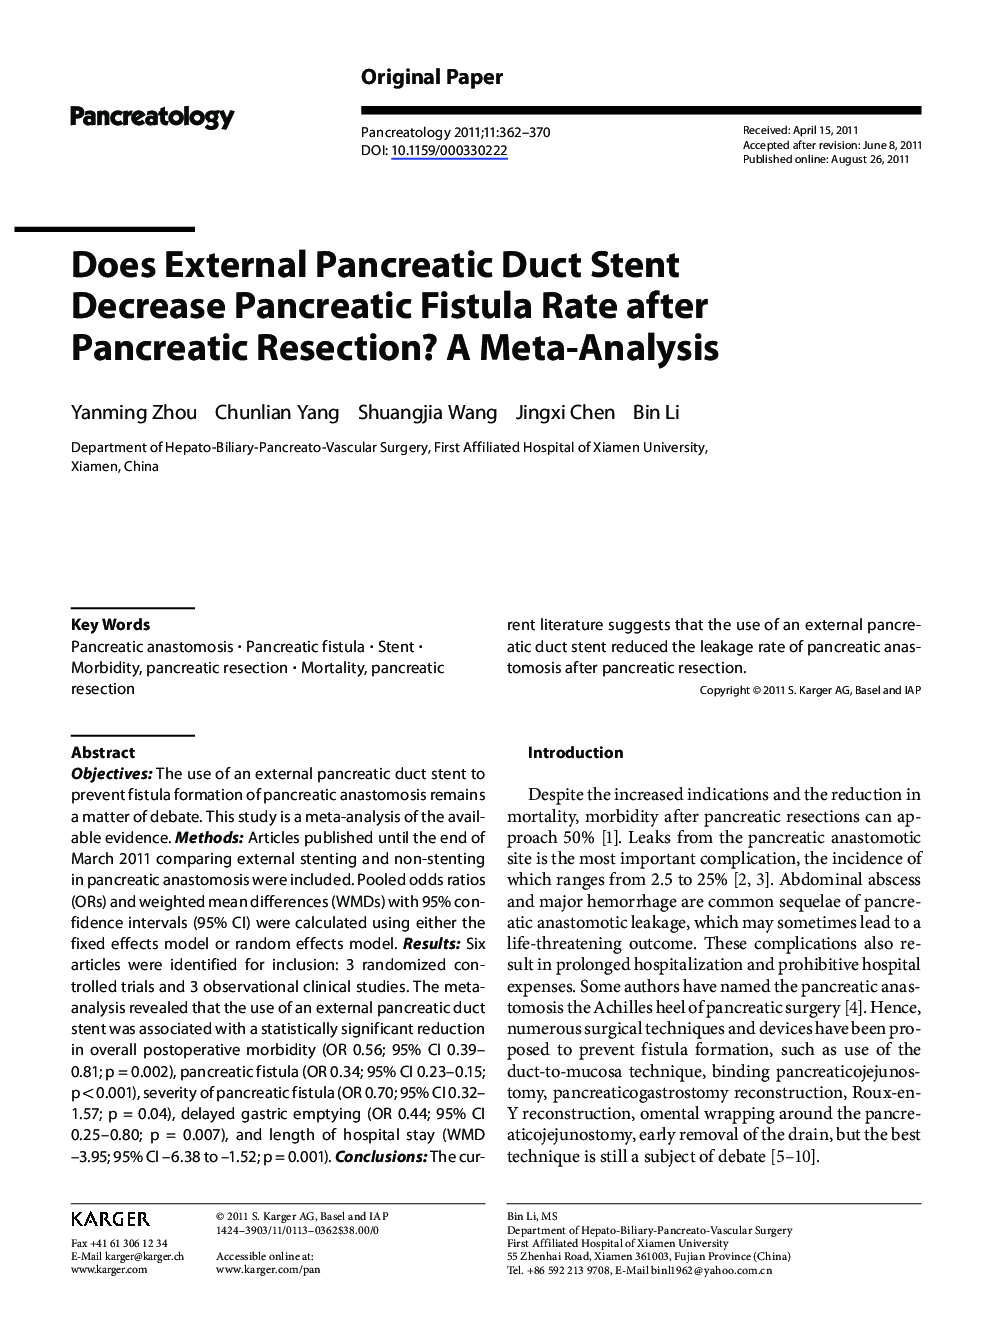 Does External Pancreatic Duct Stent Decrease Pancreatic Fistula Rate after Pancreatic Resection? A Meta-Analysis